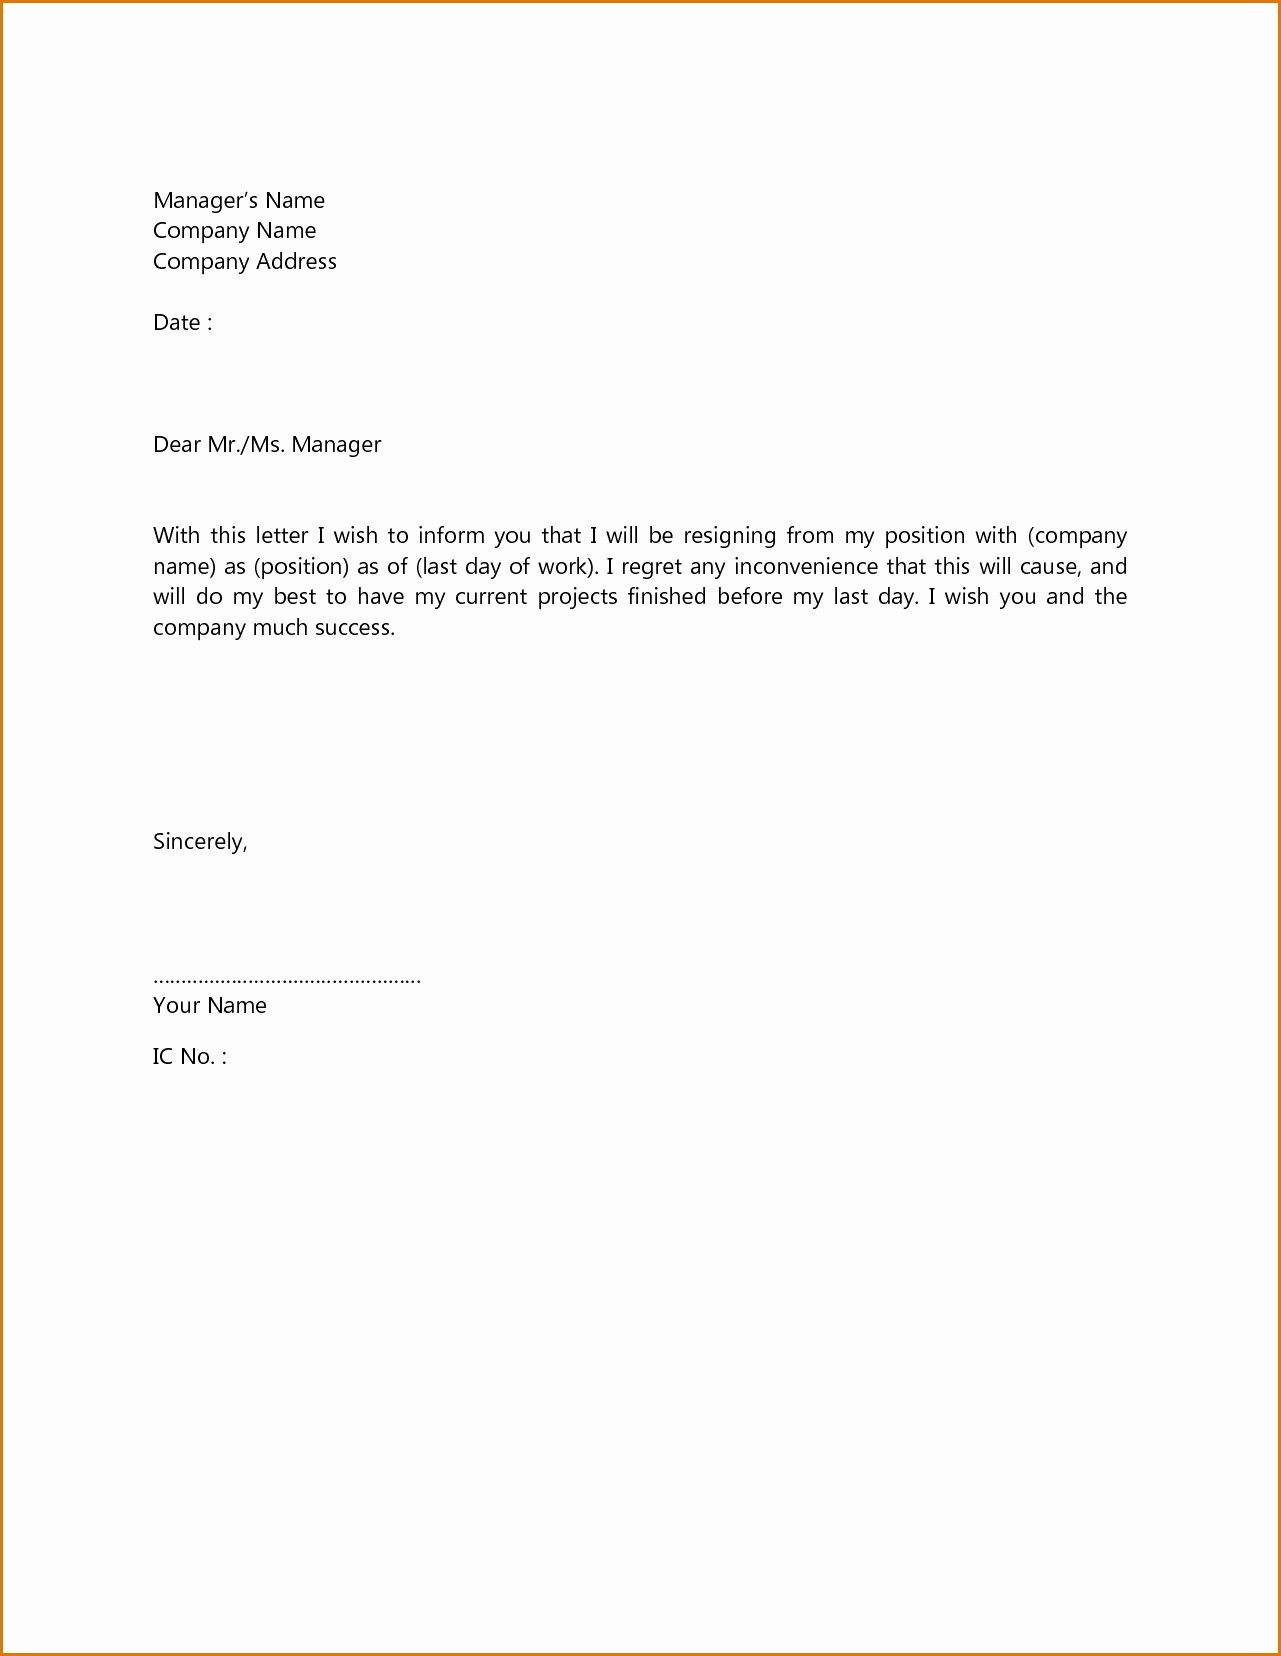 Simple Resume Cover Letter Template New Simple Cover Letter Template Ideasplataforma